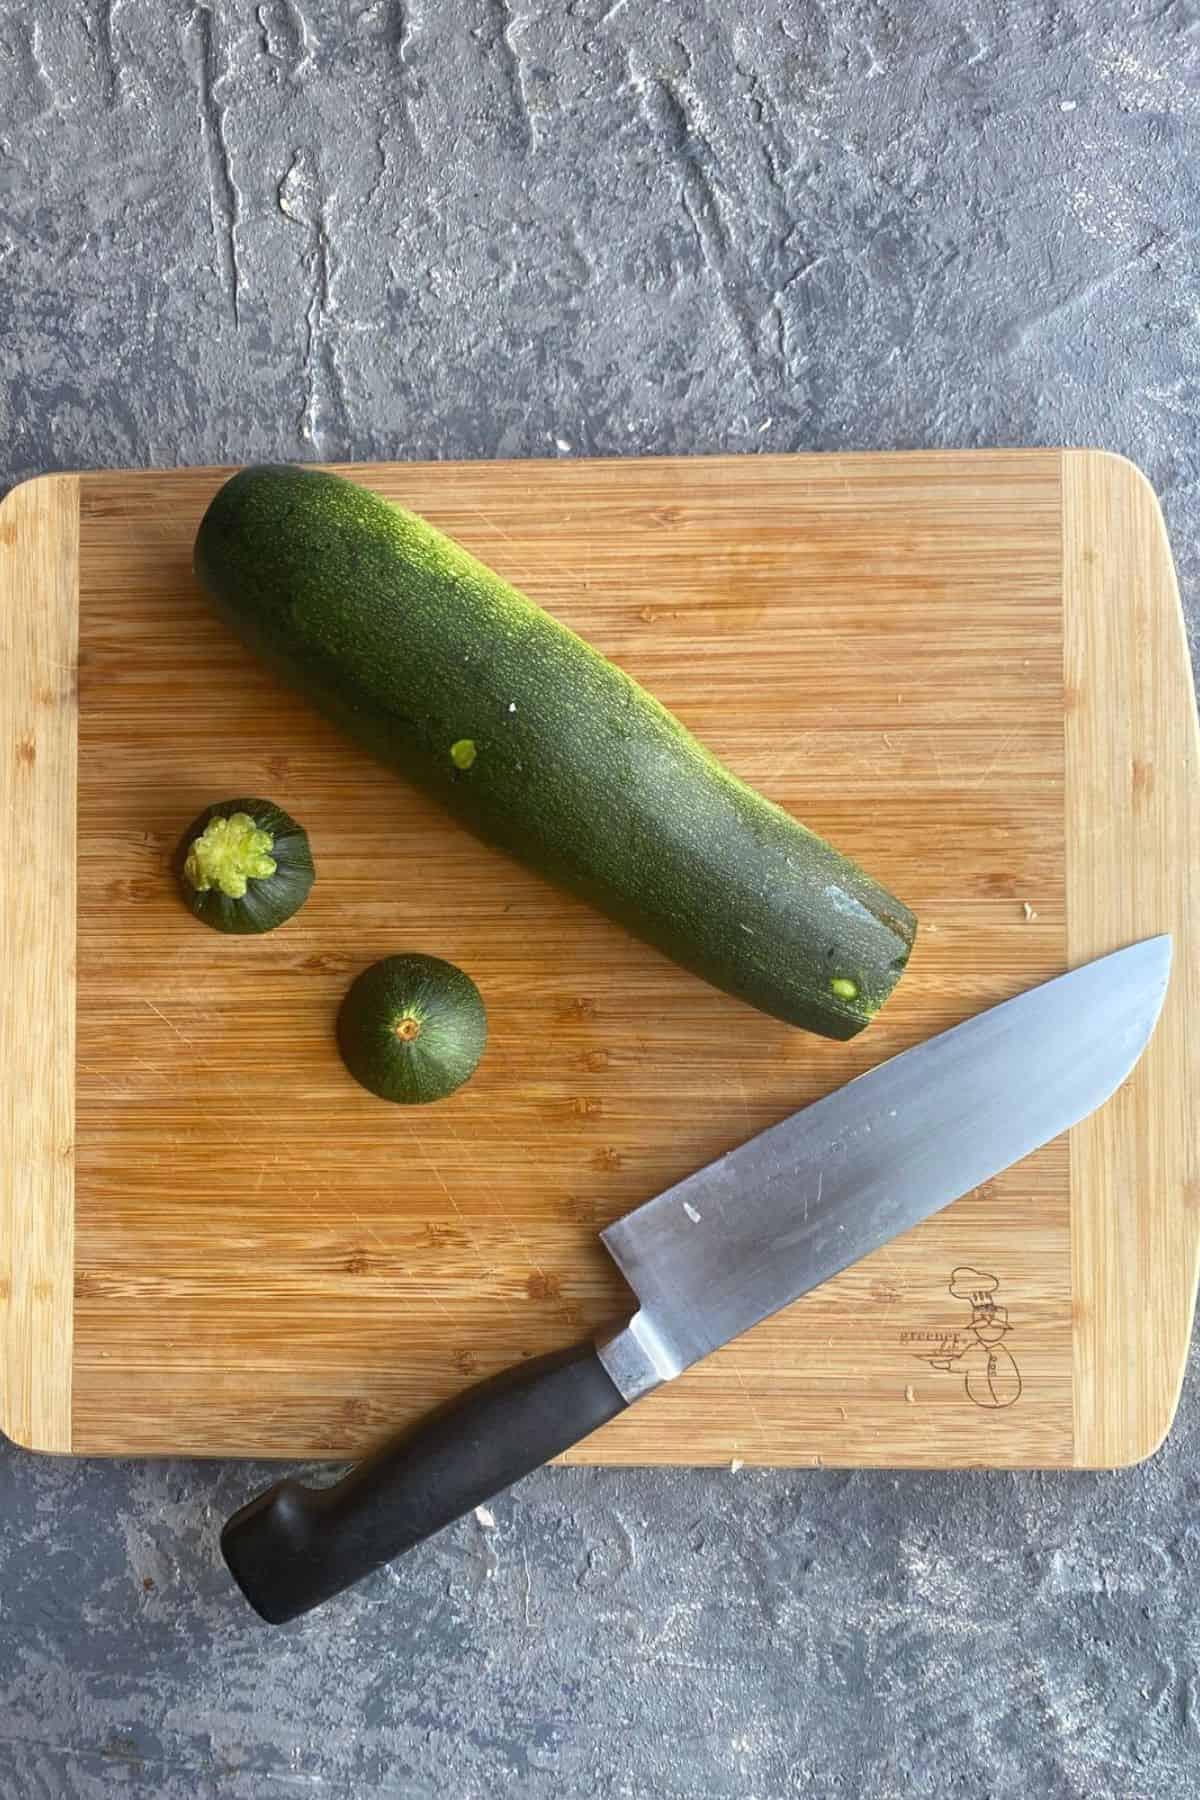 An overhead view of a cutting board with a zucchini with the ends chopped off